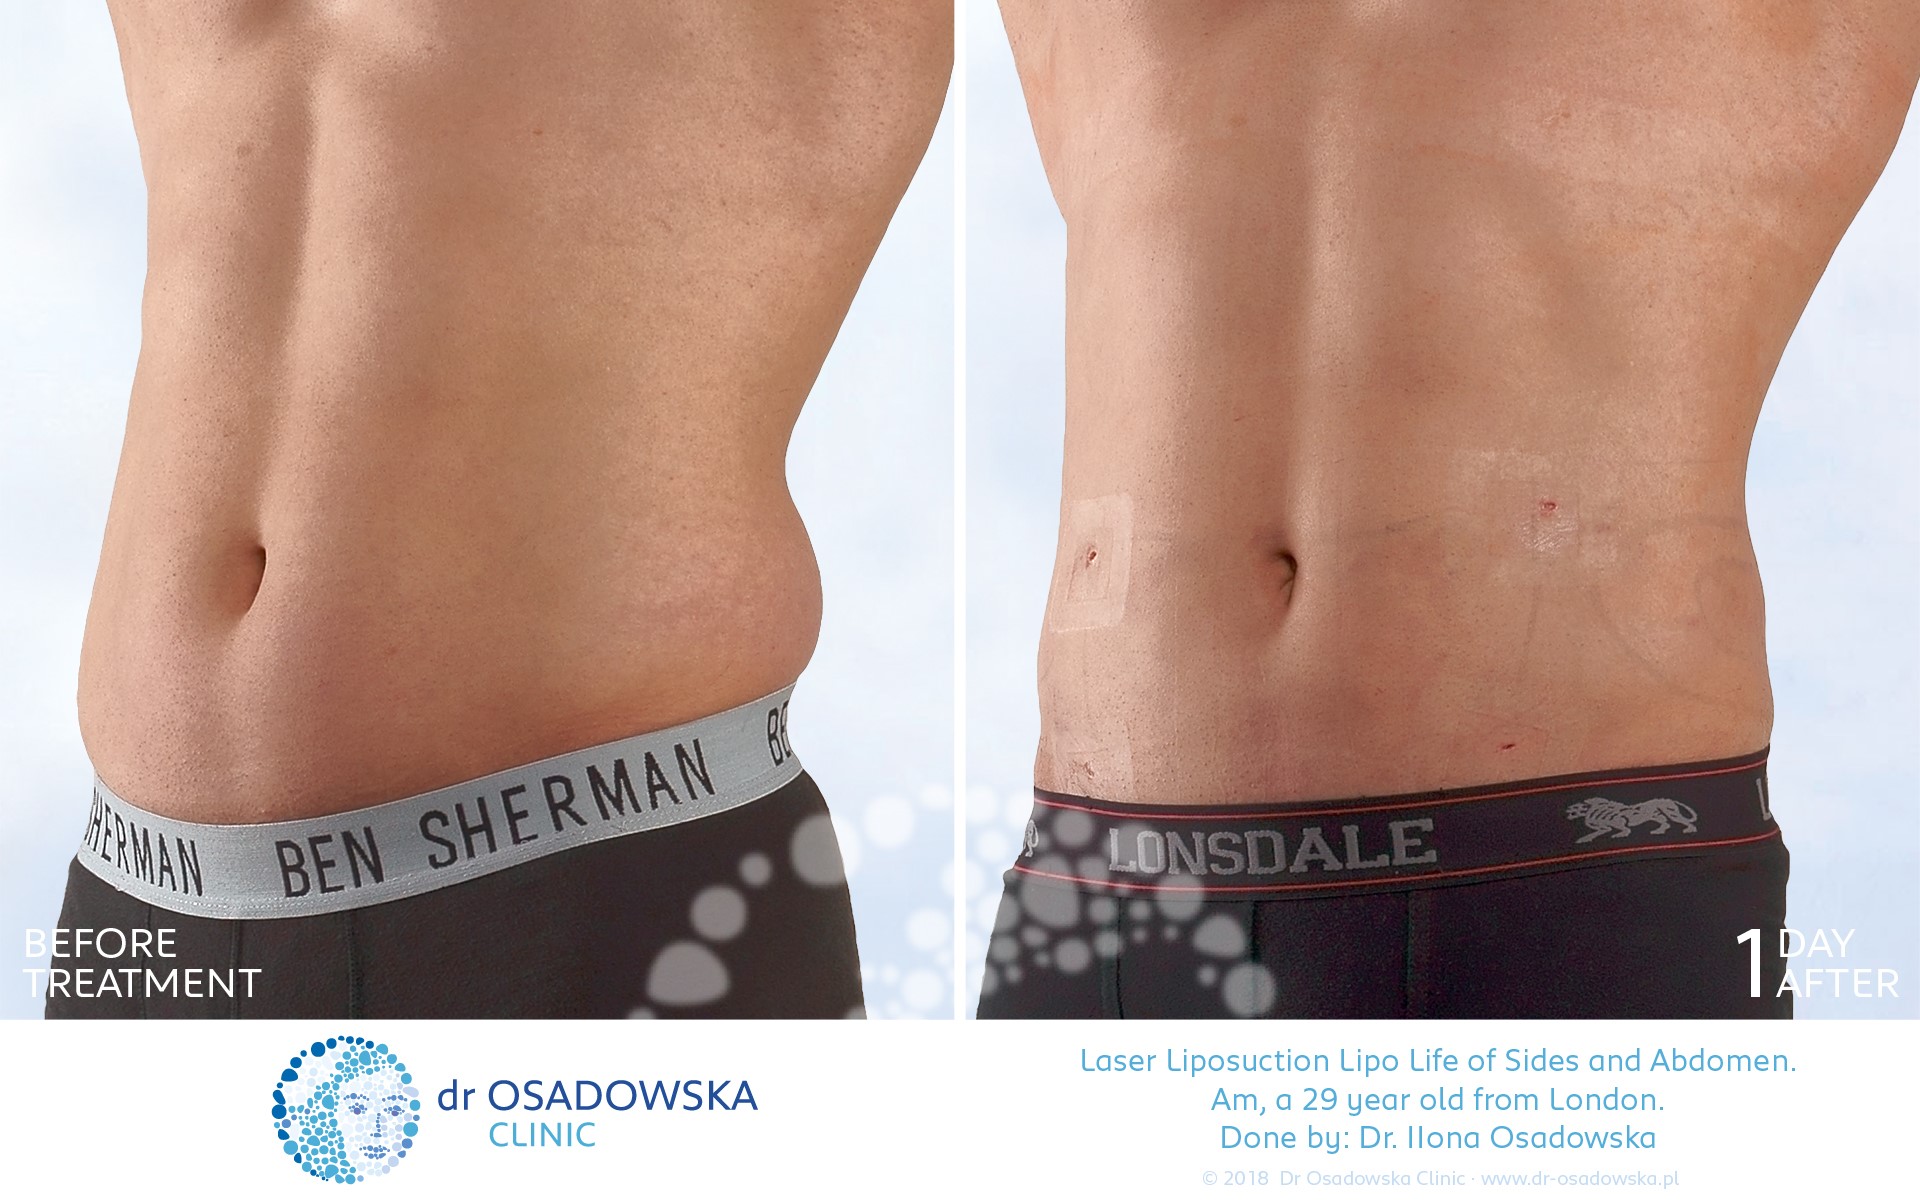 Liposuction abdomen flanks - sides, LipoLife, before and 1 day after. Am, a fitness instructor from the UK. 